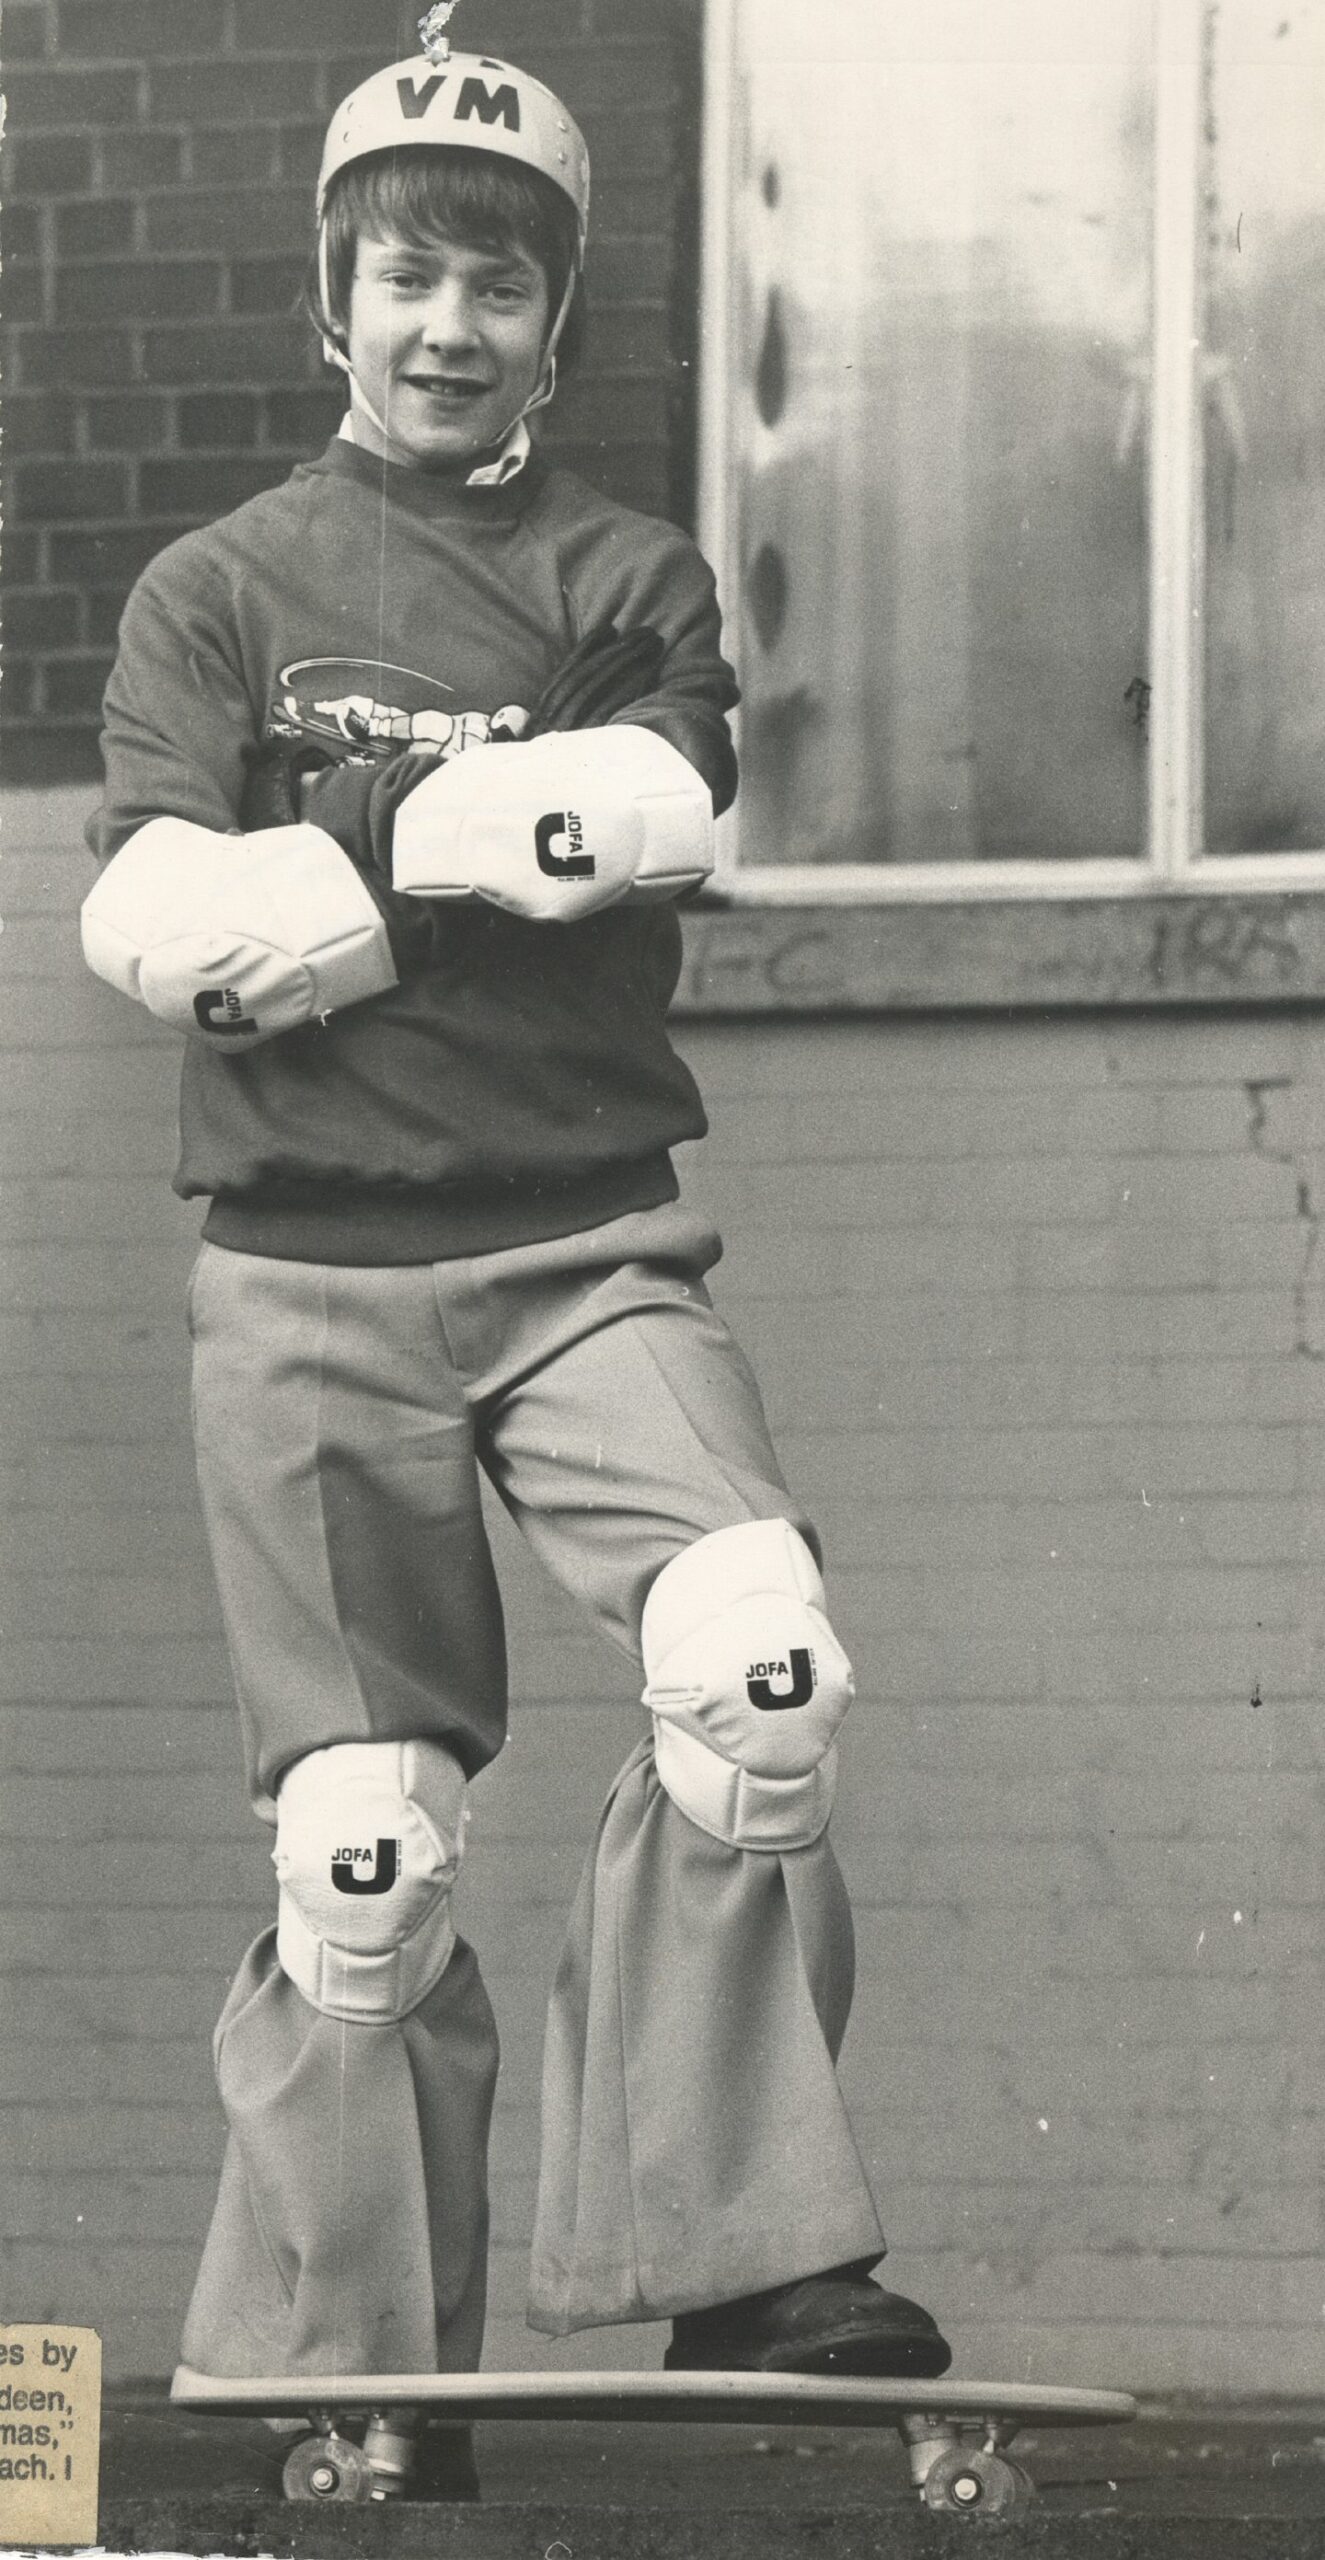 Pupil Roy Lyon with his skateboard in 1977.